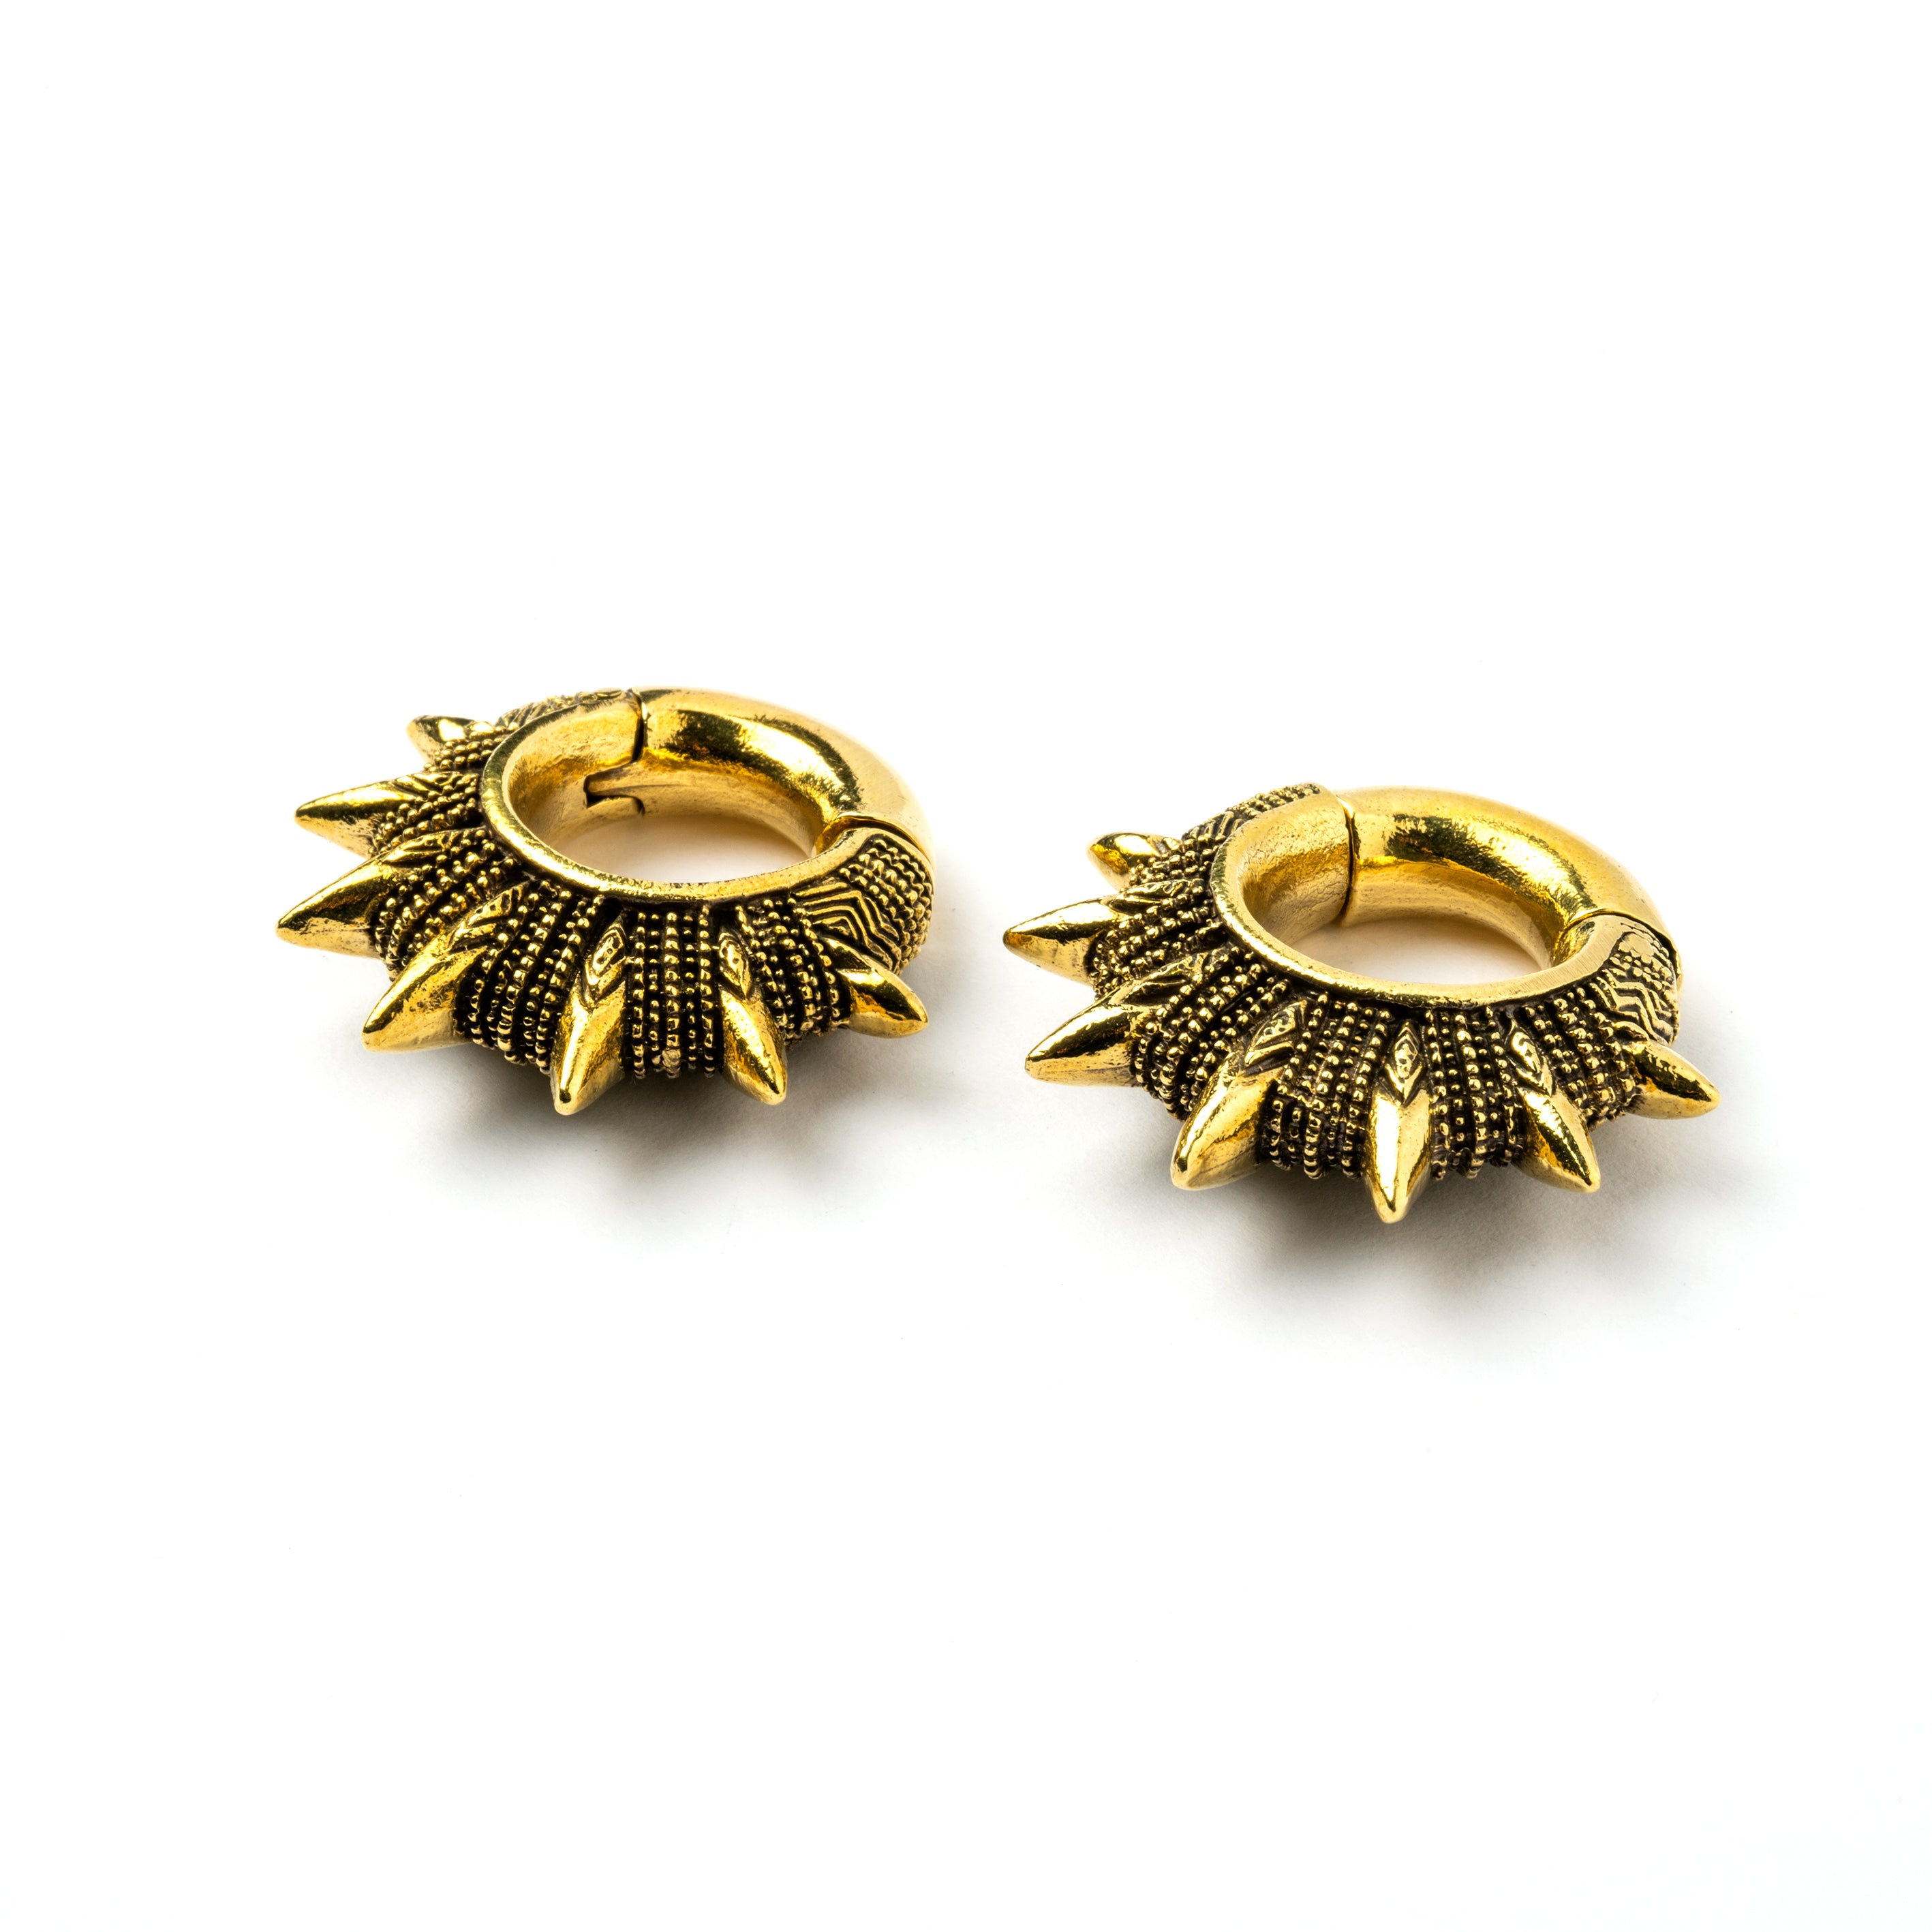 pair of golden spiky ear weights hoops down view